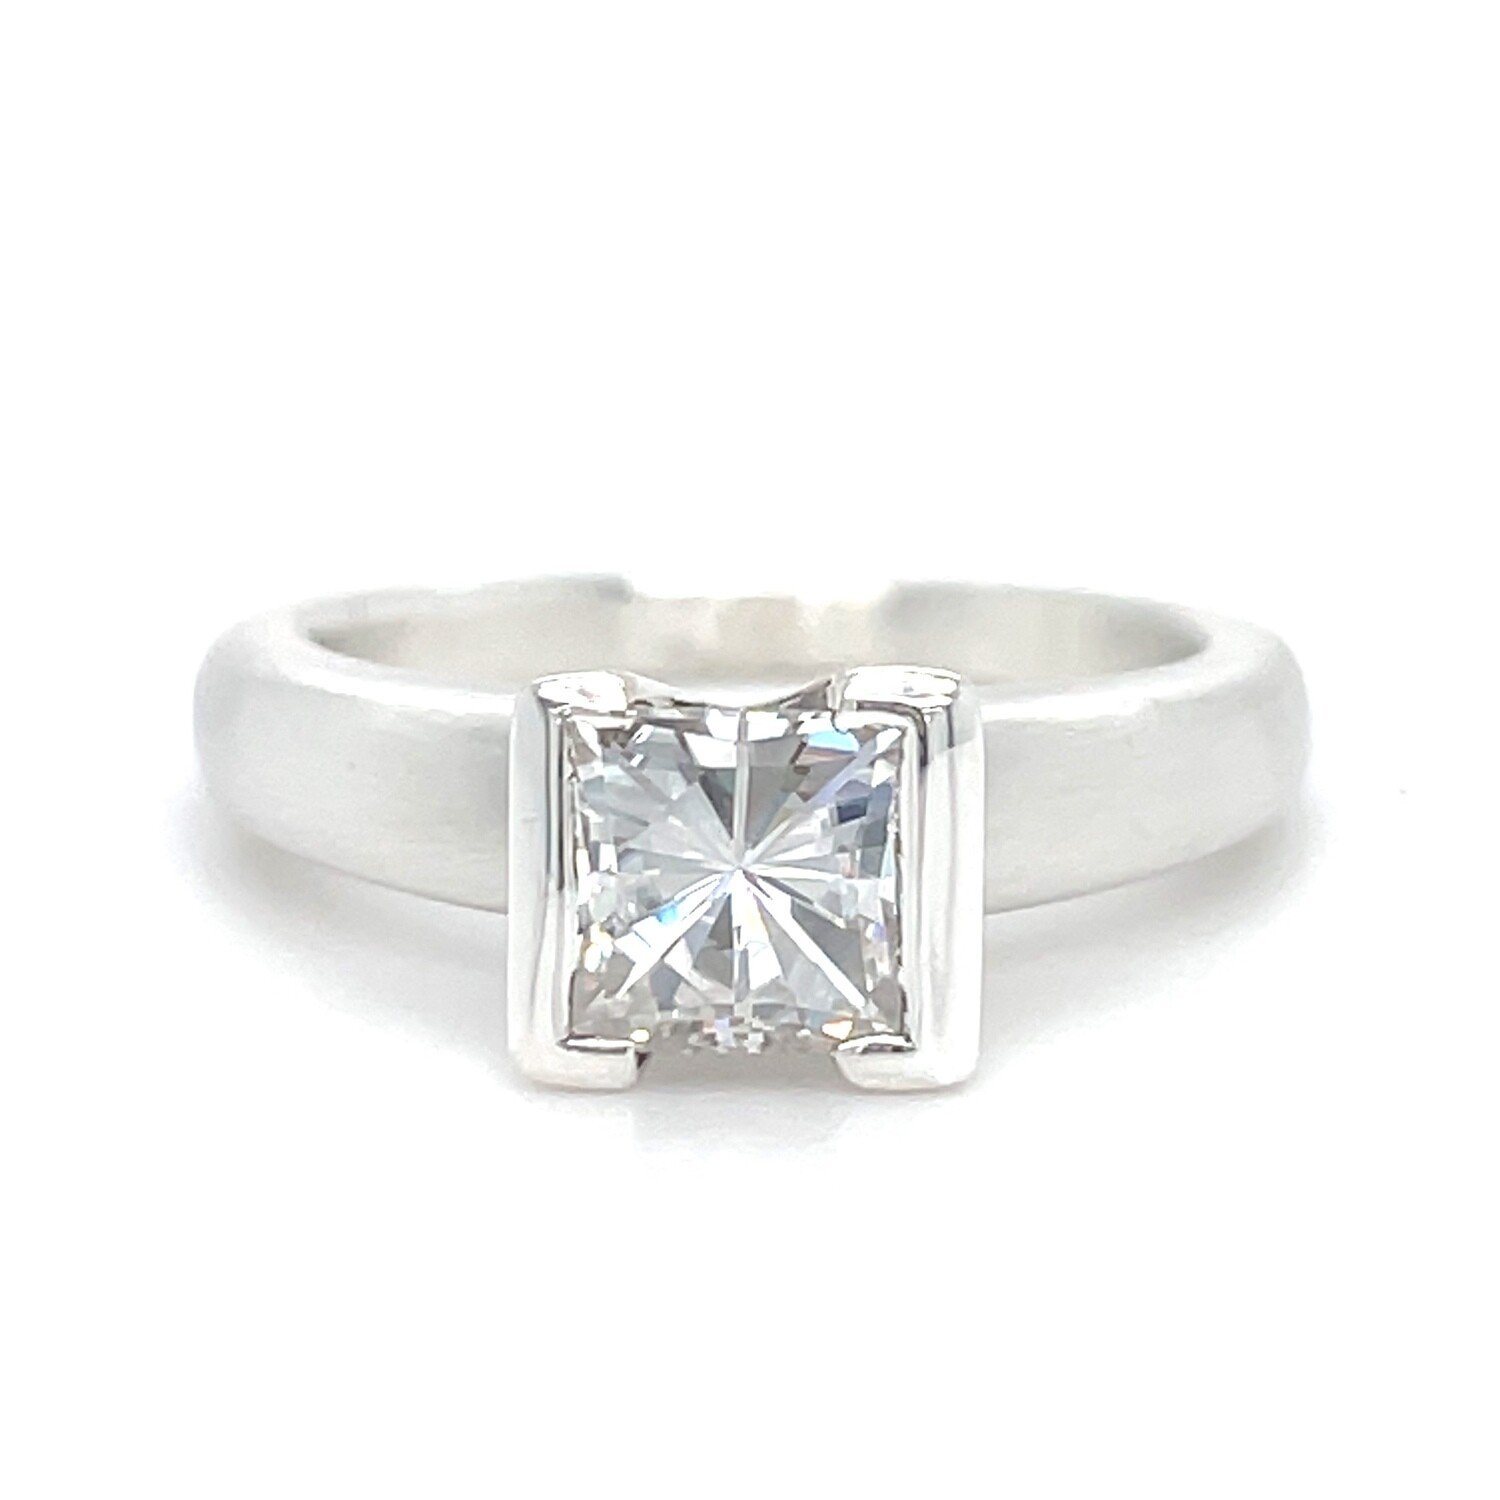 Sterling Silver Princess Cut Moissanite Ring — 0.81ct